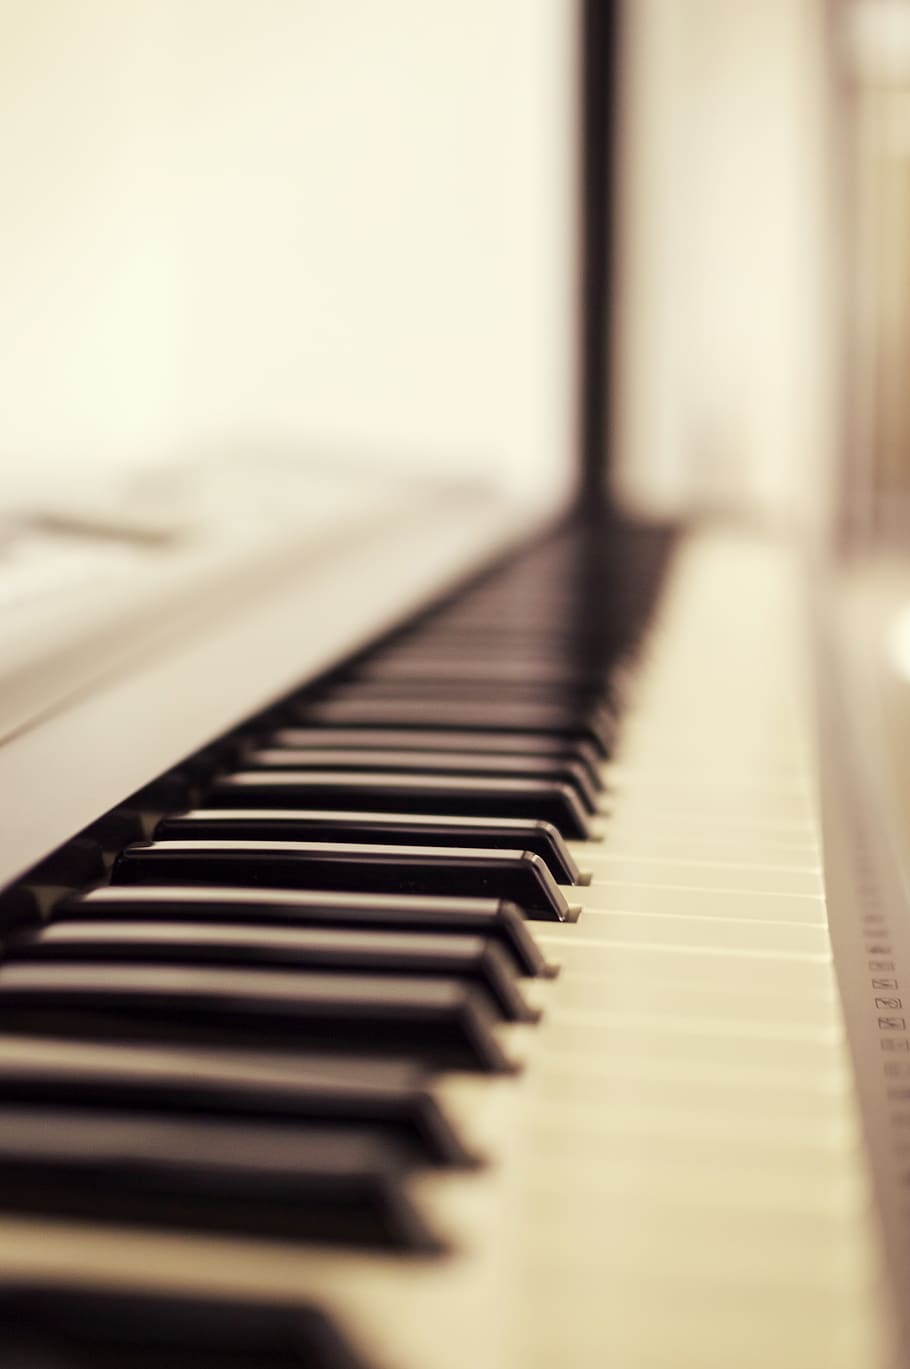 piano, keyboard, music, instrument, keys, musical instrument, musical equipment, piano key, selective focus, arts culture and entertainment